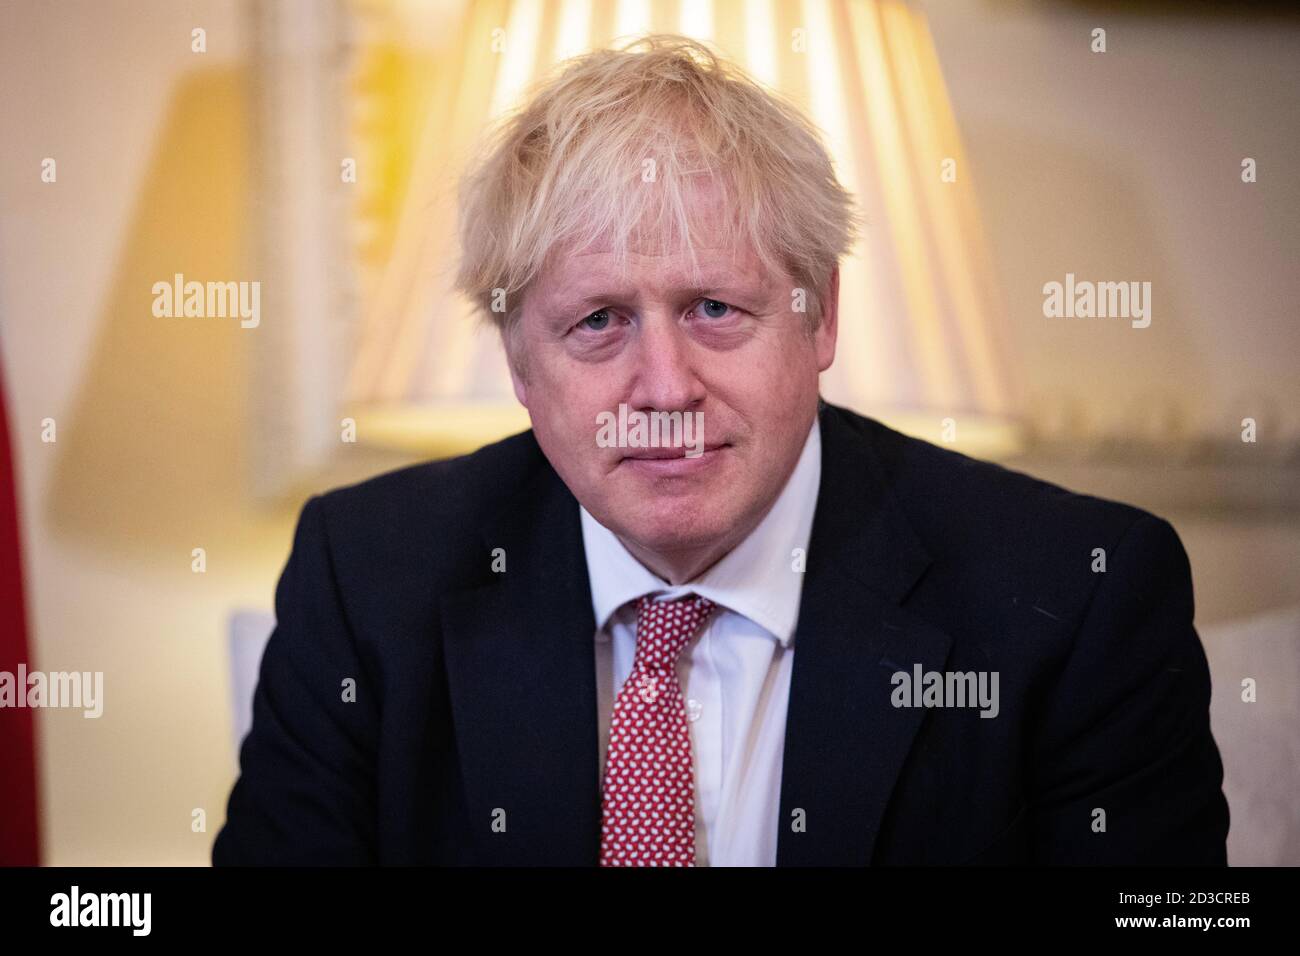 Prime Minister Boris Johnson during a meeting with President of Ukraine, Volodymyr Zelenskyy, in Downing Street , London, to sign a strategic partnership deal with the president in the face of Russia's 'destabilising behaviour' towards the country. Stock Photo